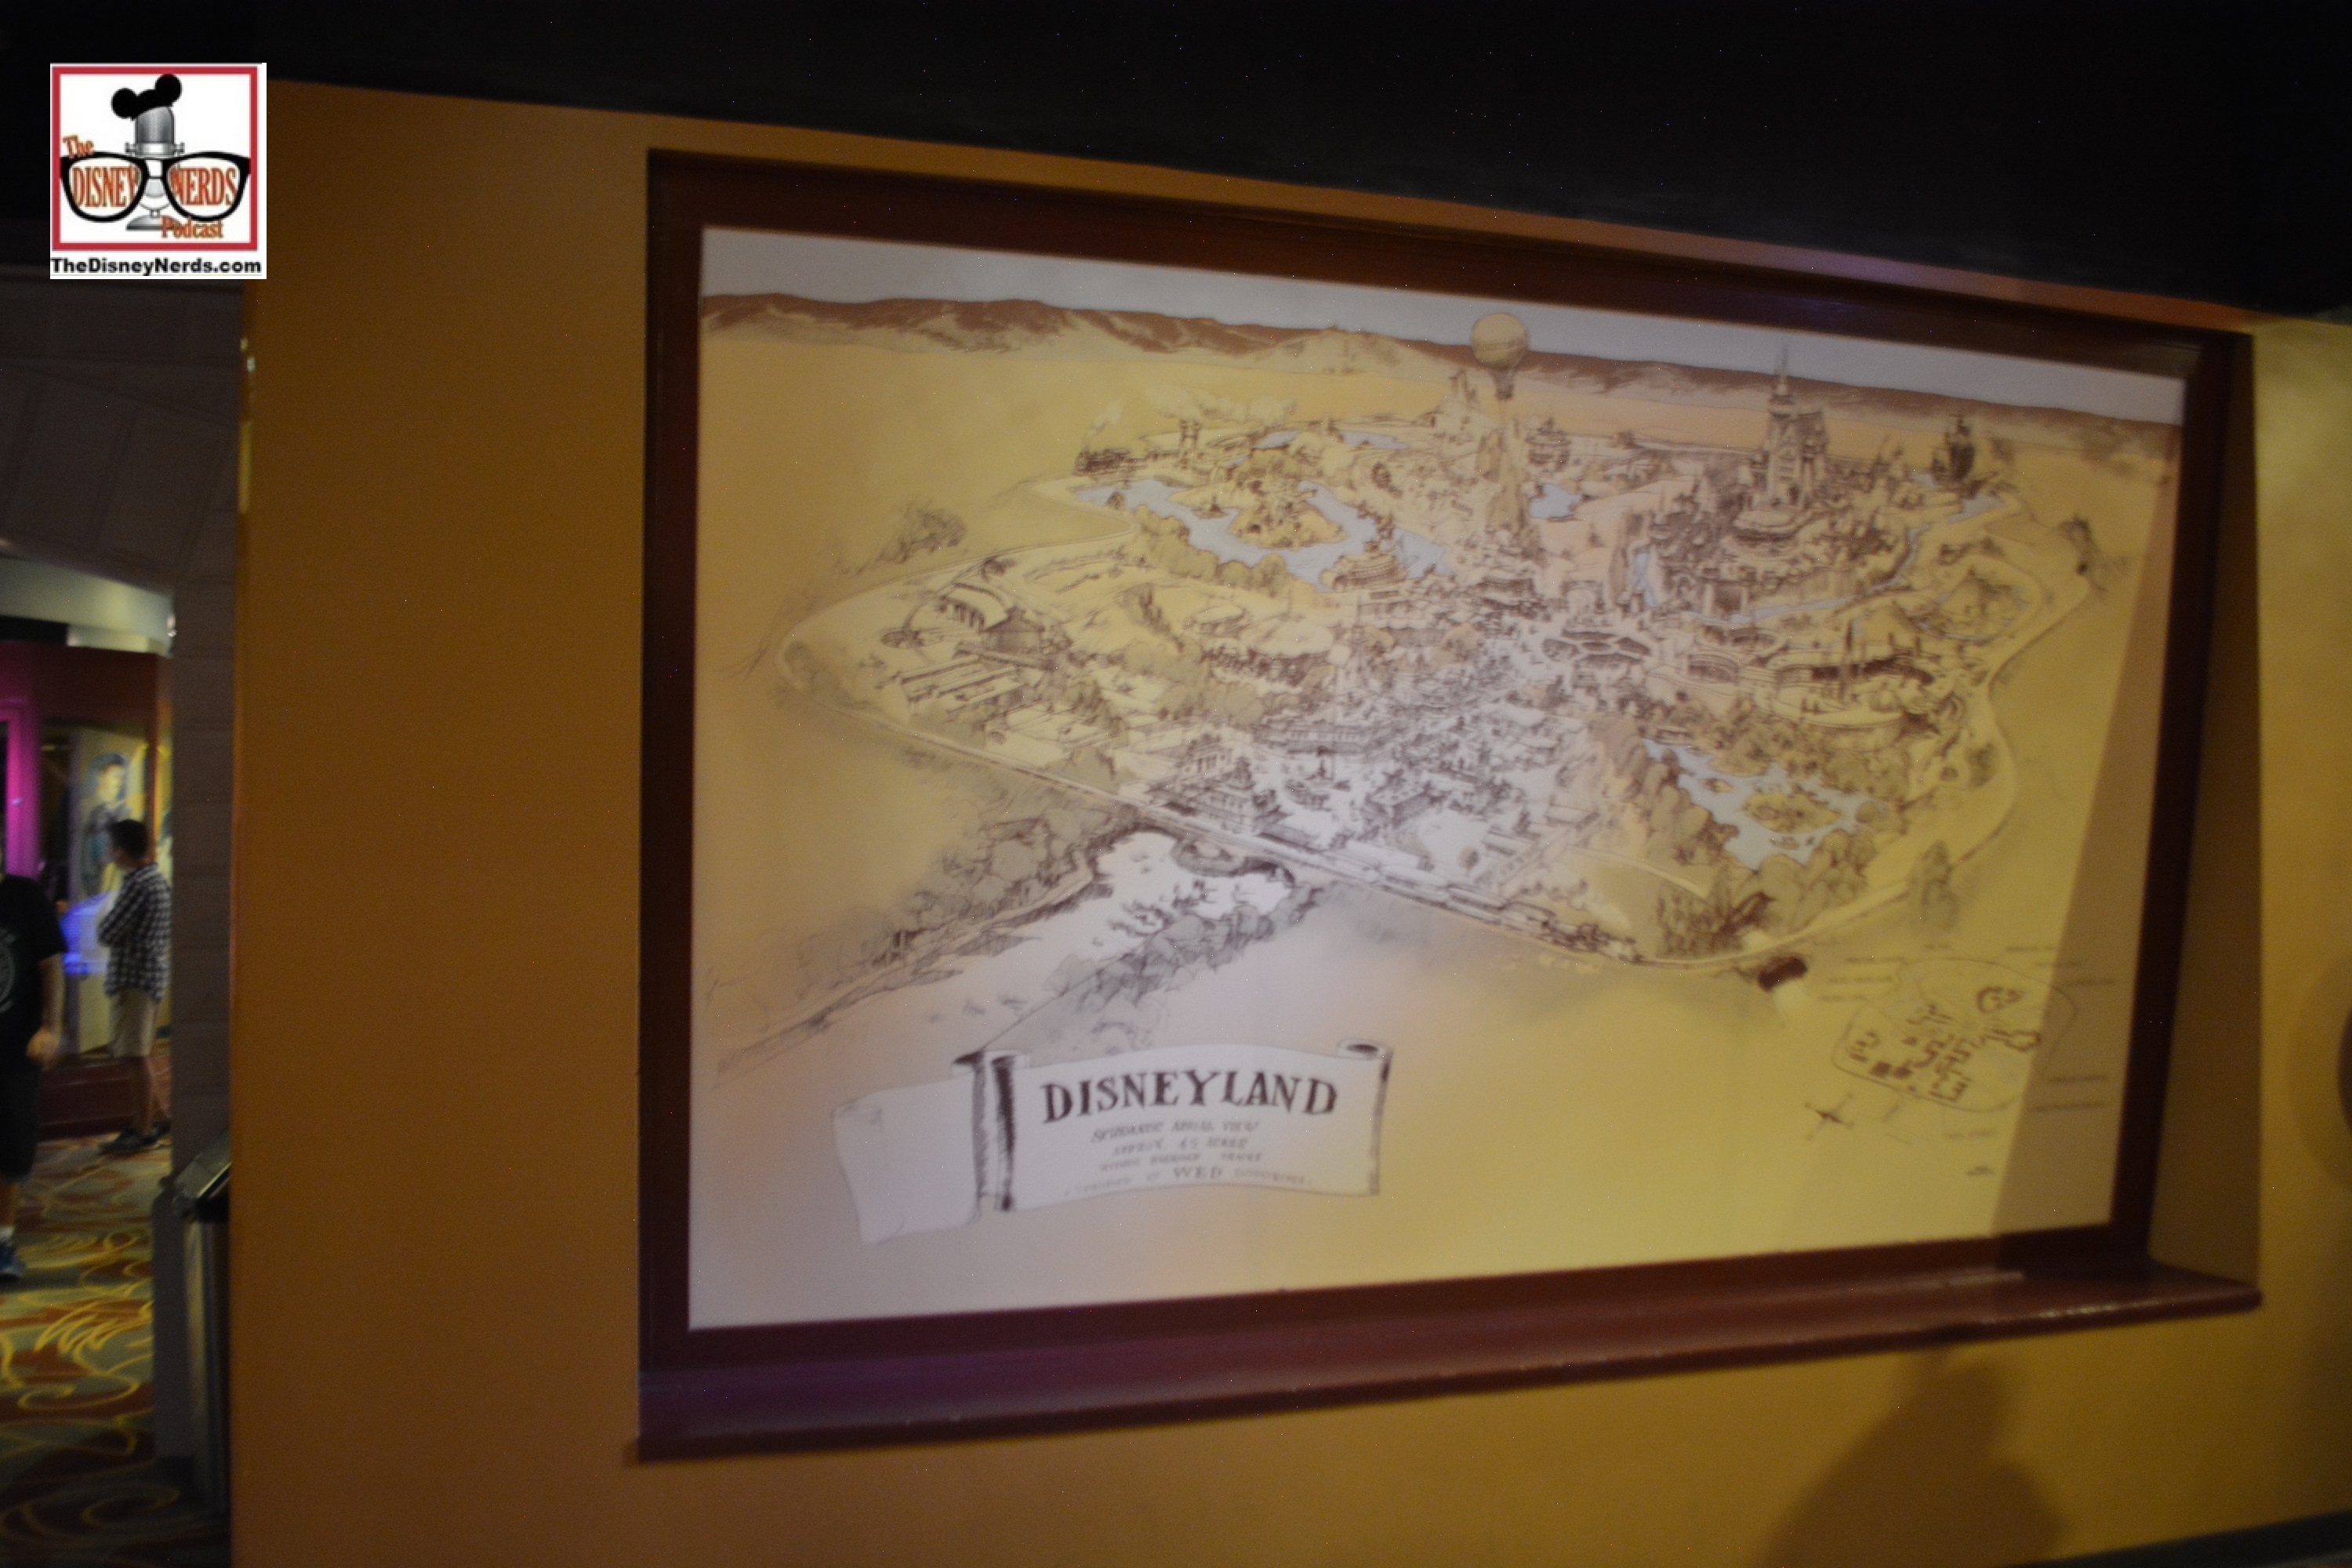 Walt's Office has been removed... love the map that replaced it - but the missing office is indeed a sign of the end to come...